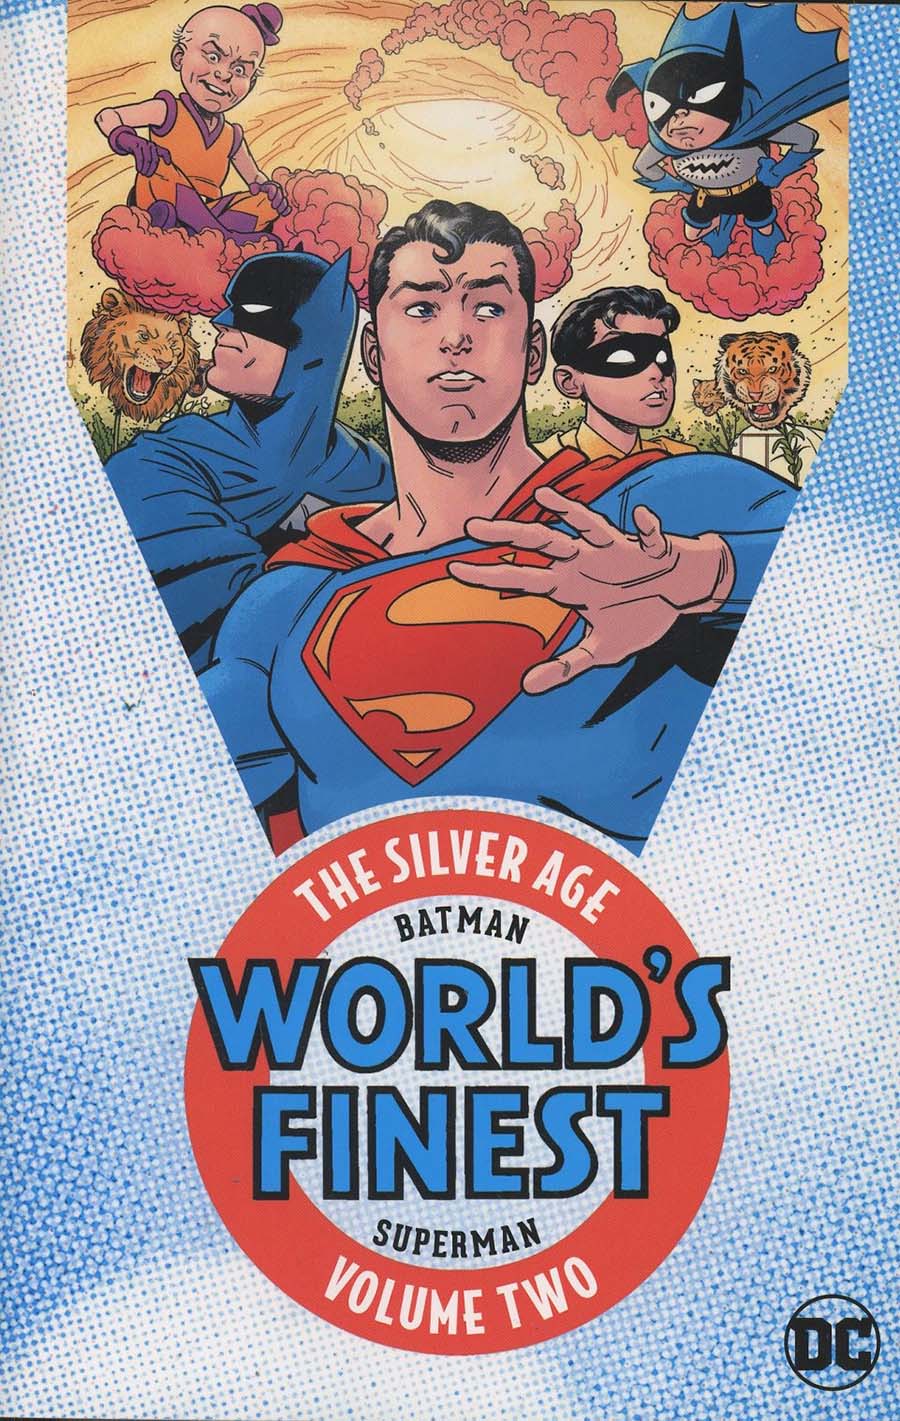 Batman And Superman In Worlds Finest Comics The Silver Age Vol 2 TP